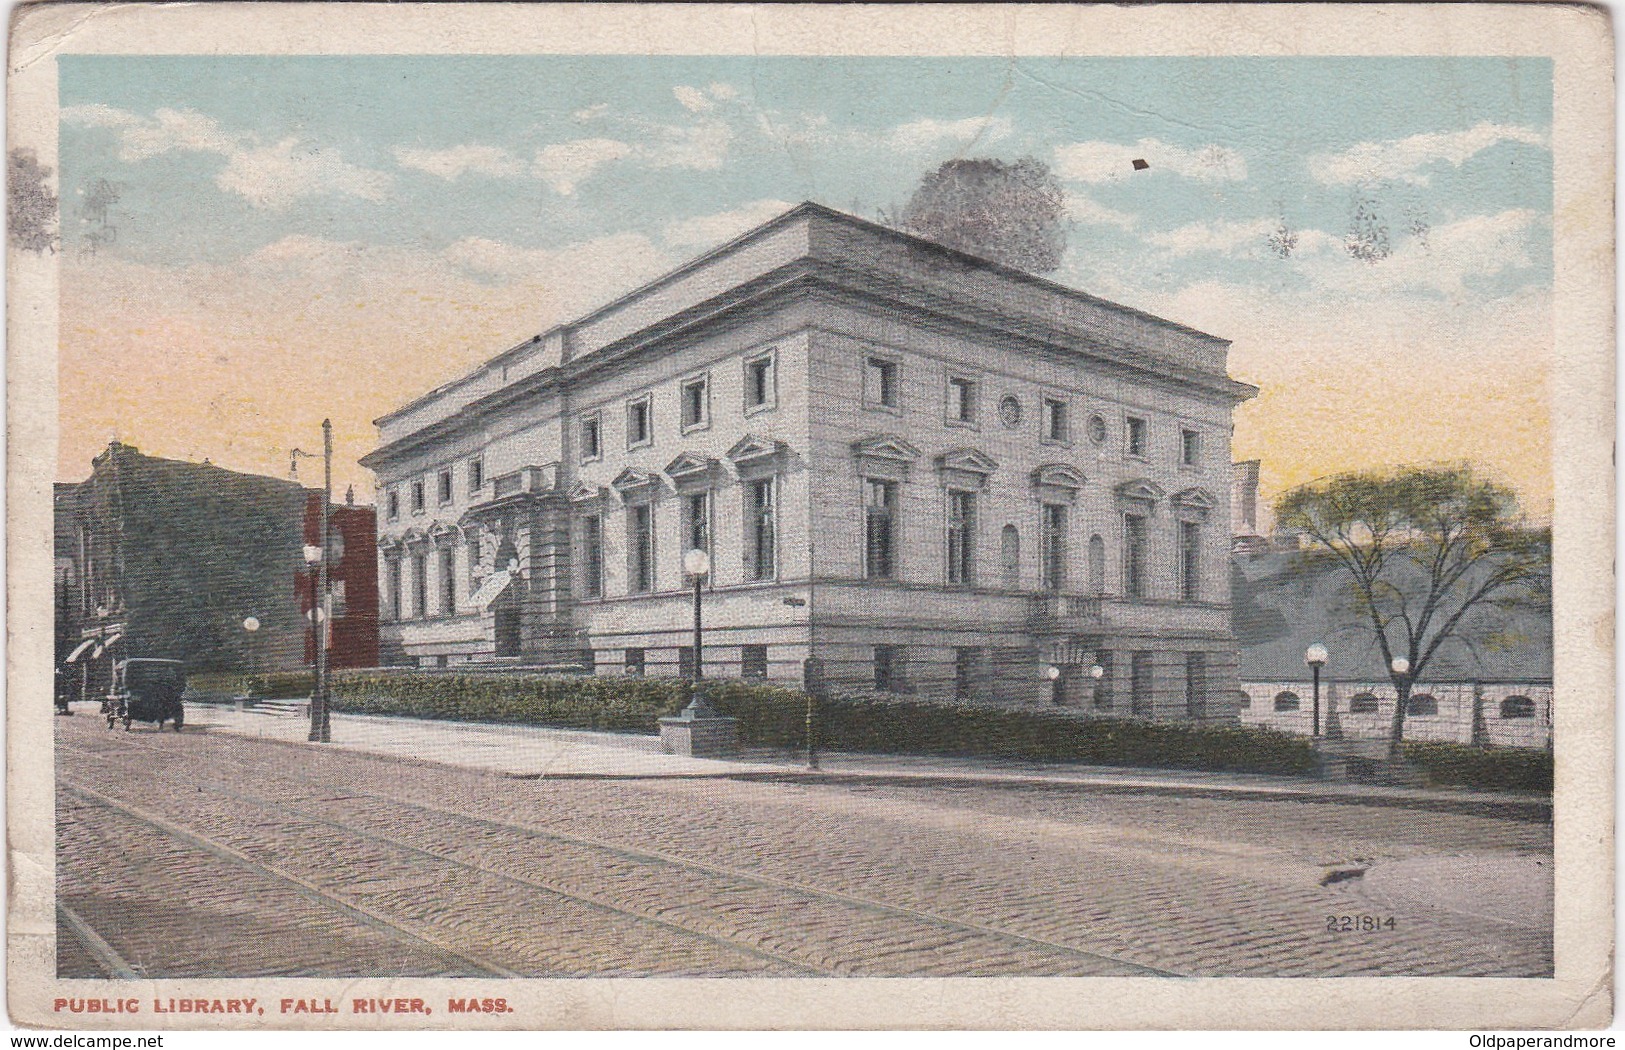 POSTCARD UNITED STATES - PUBLIC LIBRARY , FALL RIVER, MASS - Fall River